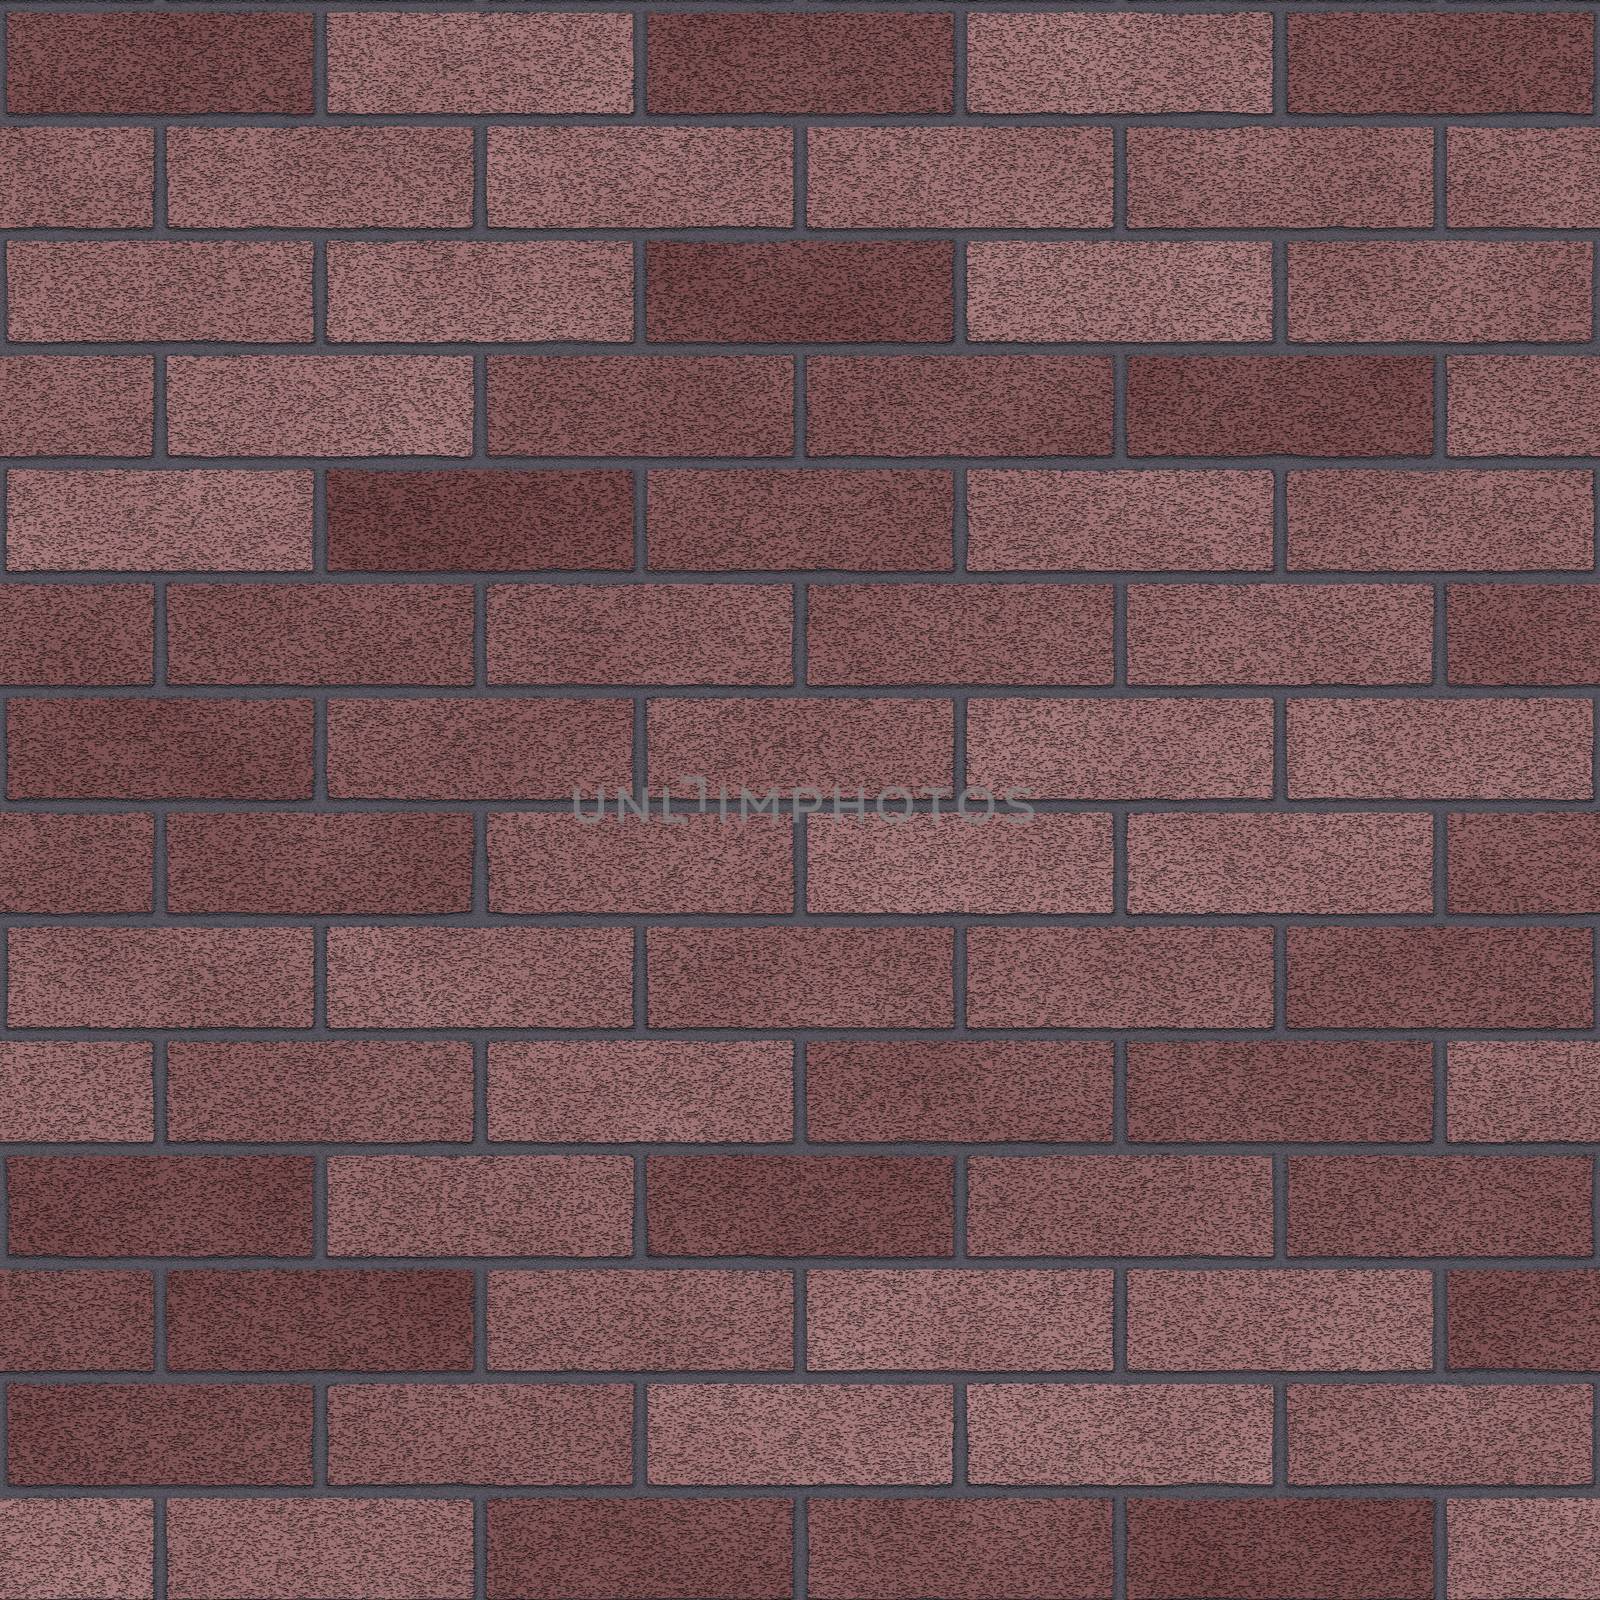 Plum Colored Clay Bricks Seamless Texture by whitechild